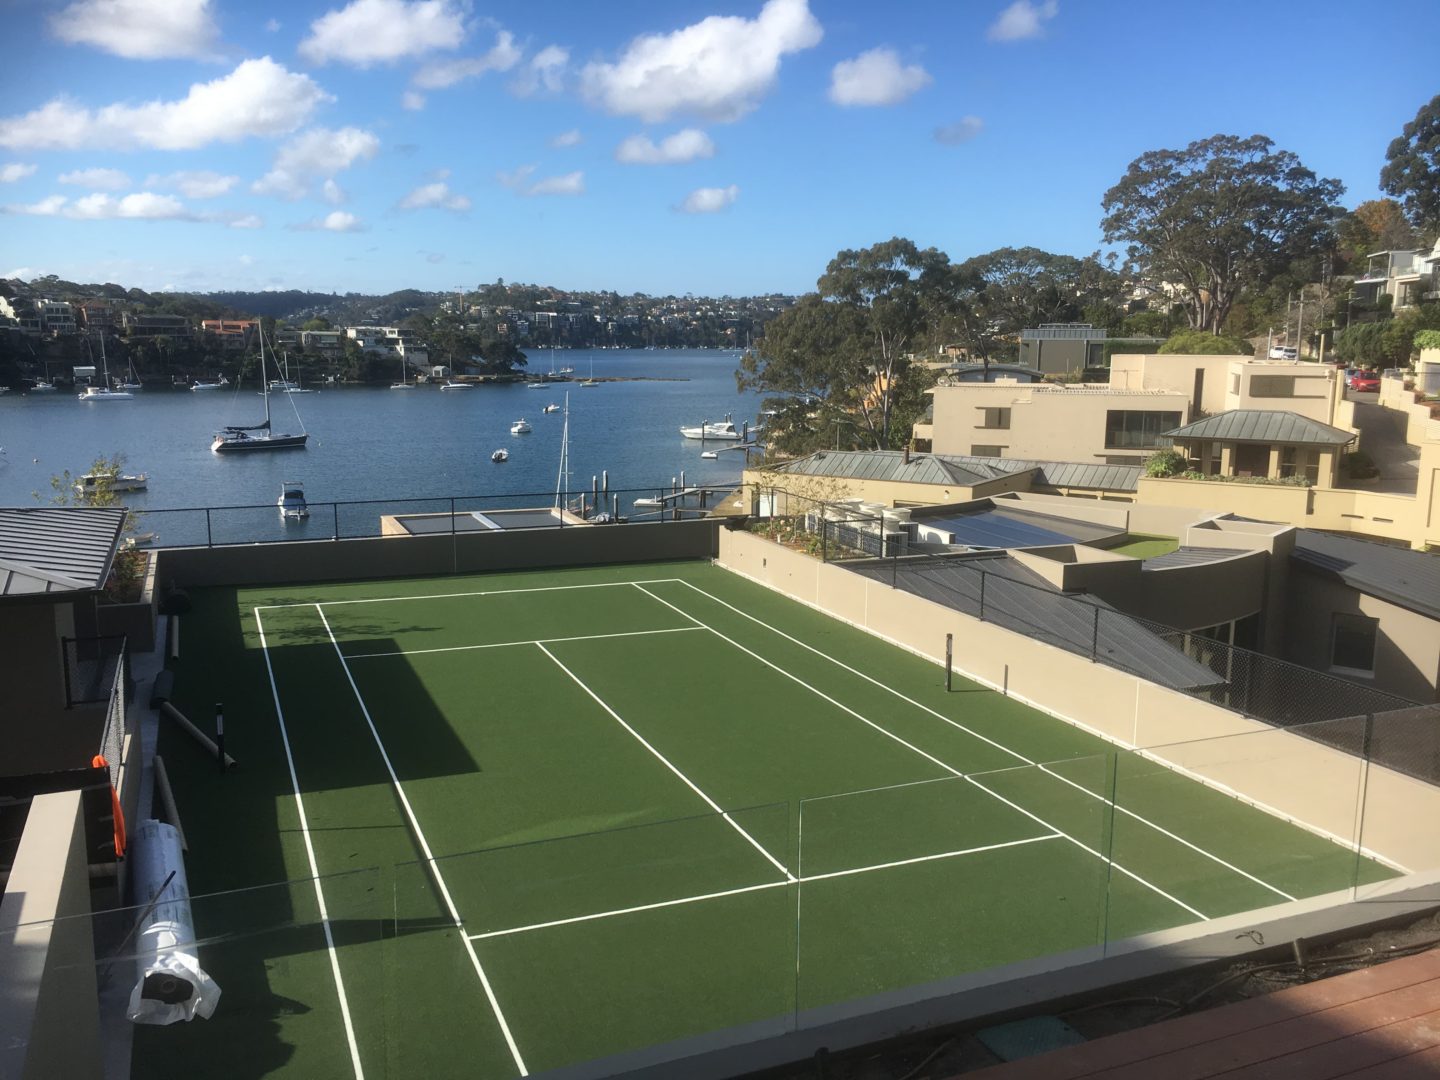 How To Build A Residential Tennis Court - Synthetic Sports Group